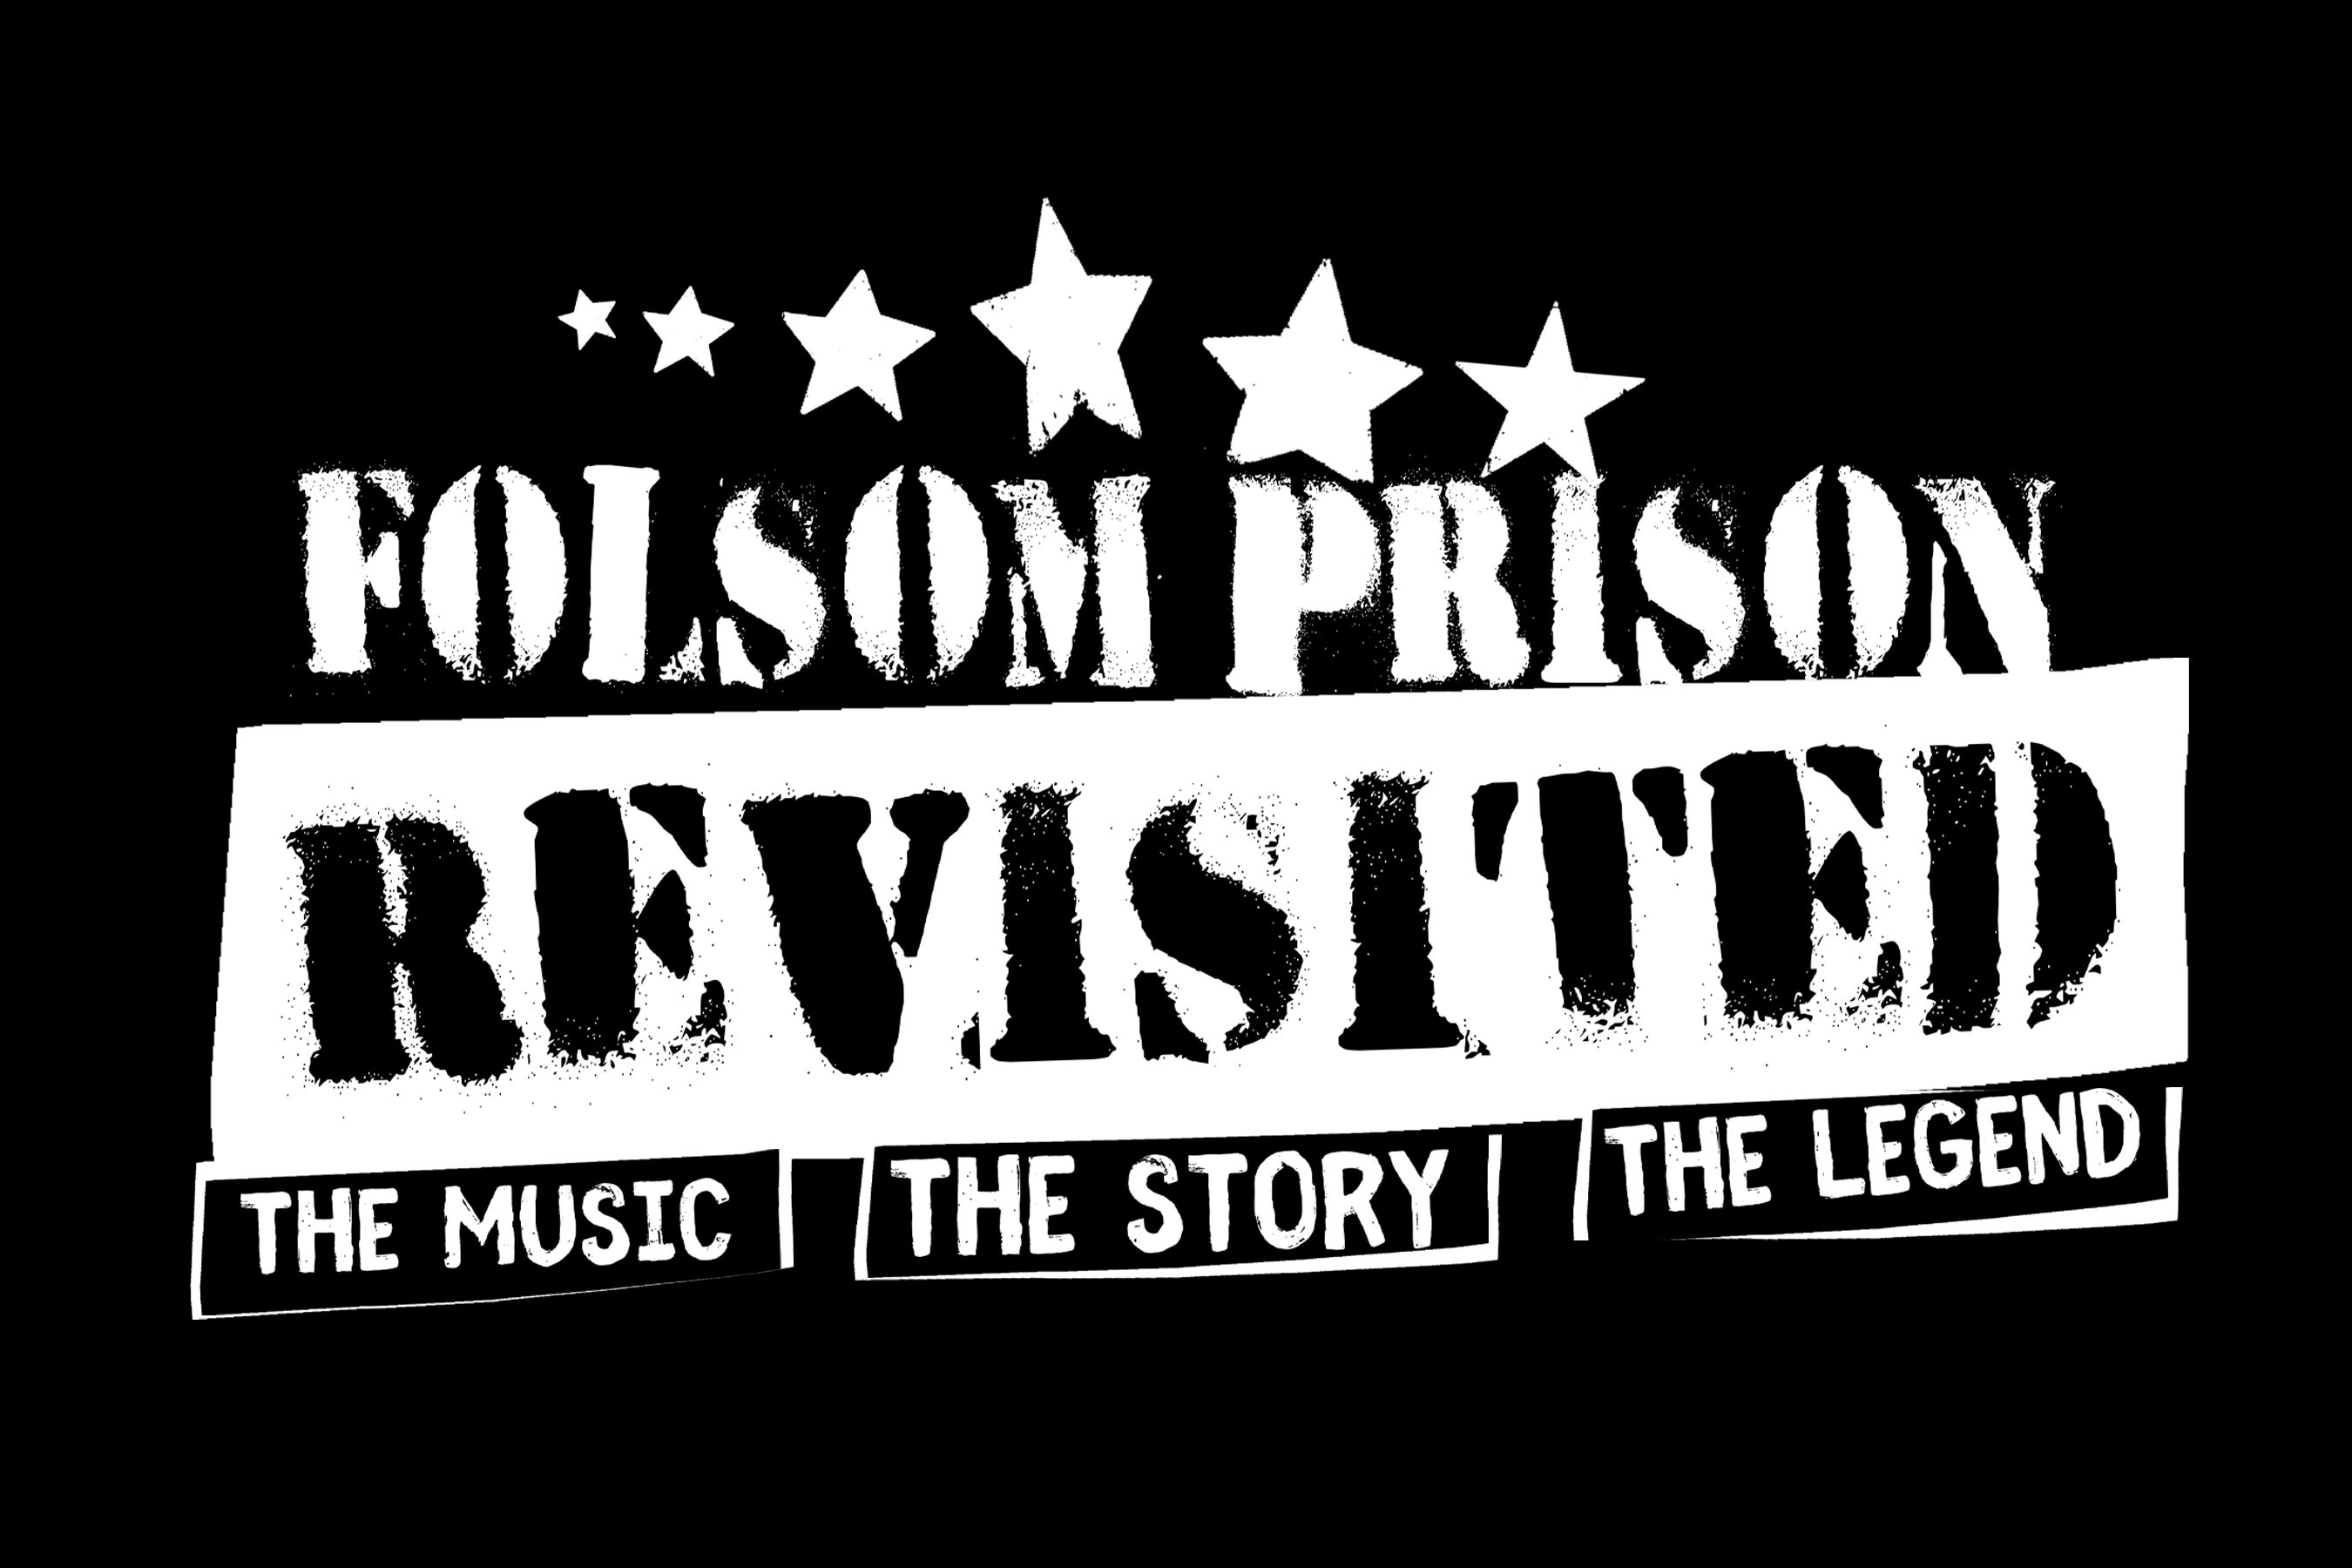 Folsom Prison Revisited free presale pa55w0rd for early tickets in Coquitlam